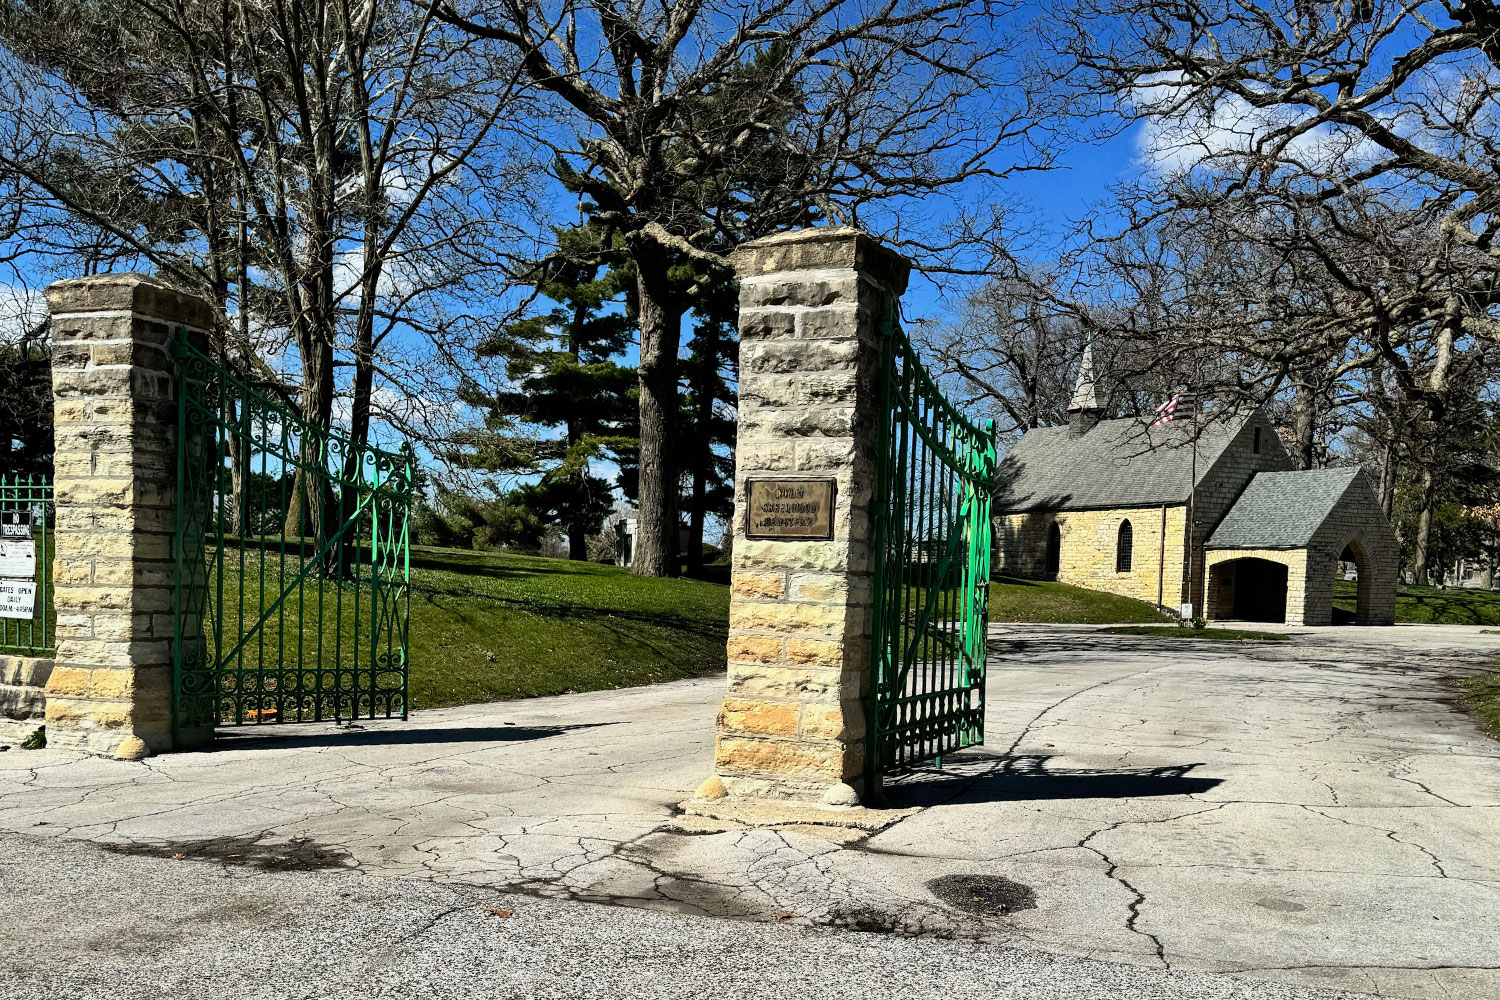 The entrance of Mount Greenwood Cemetery